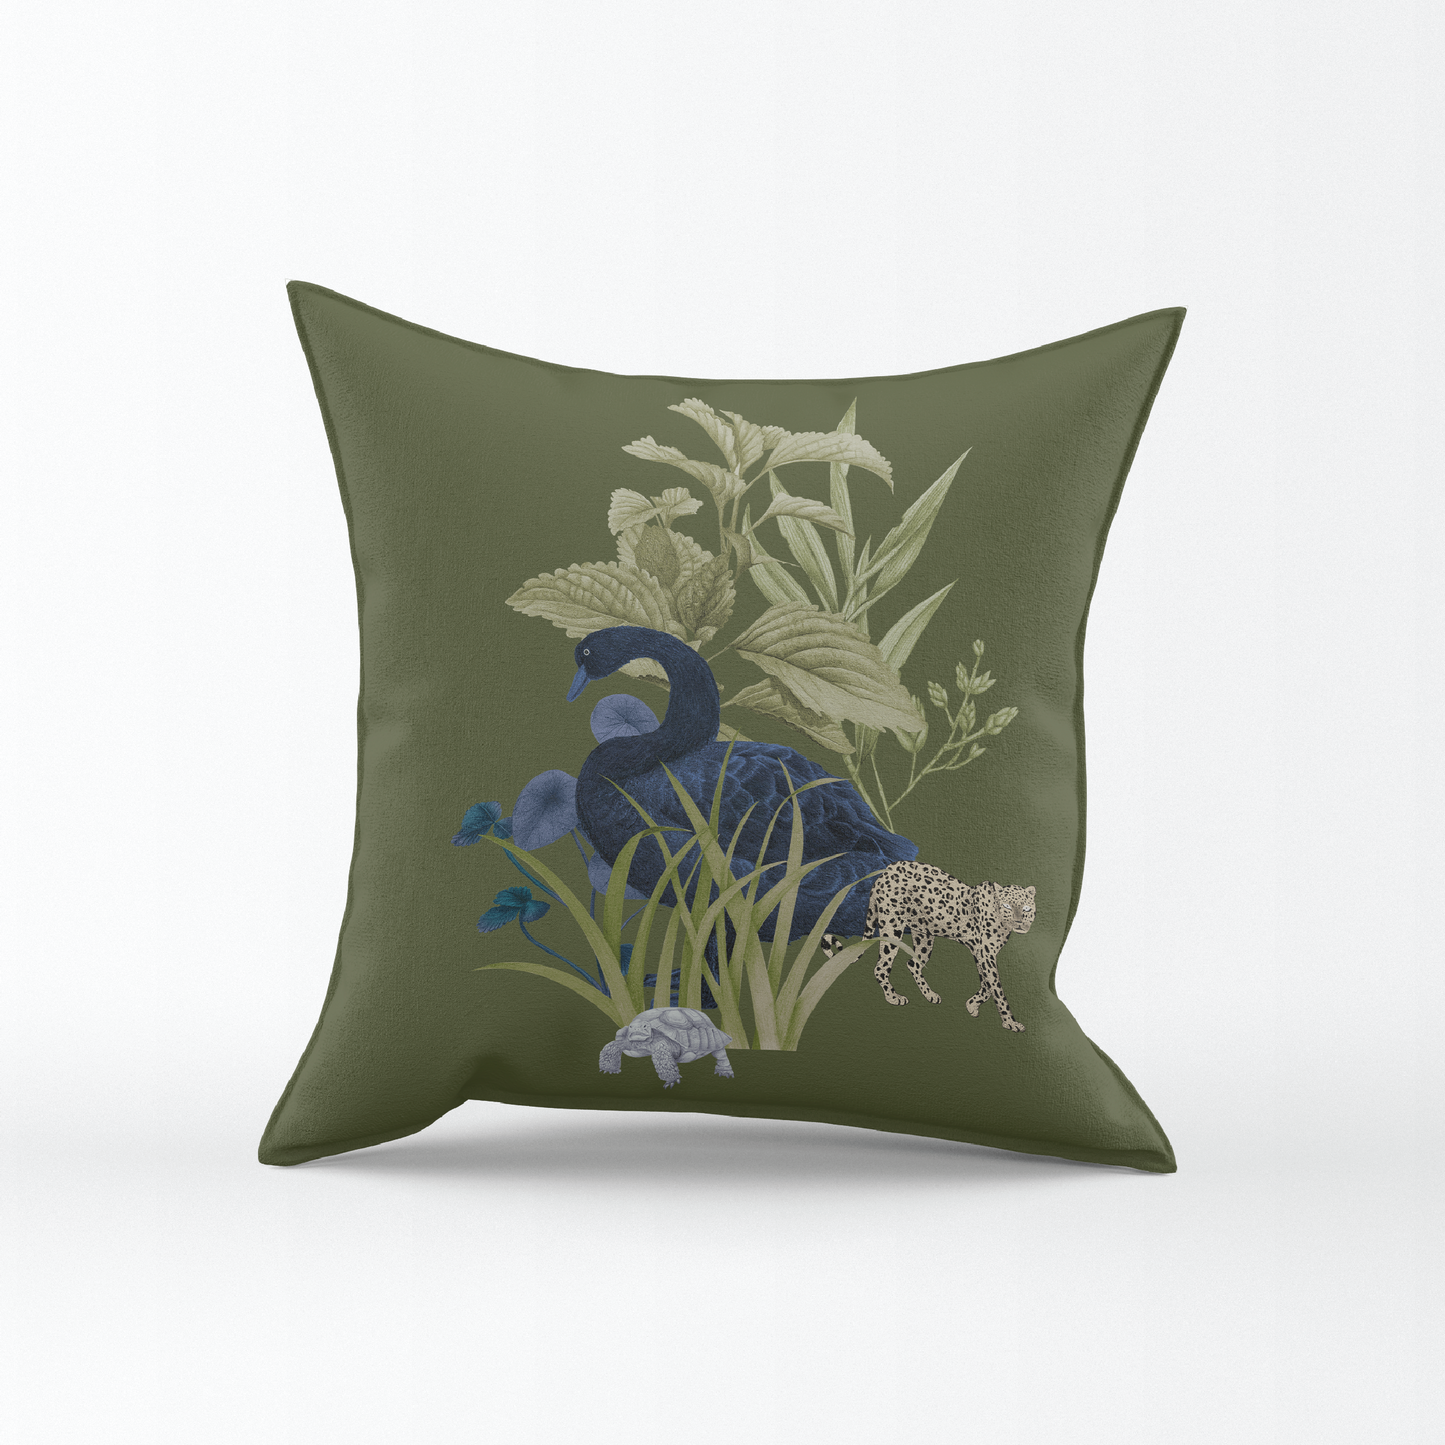 Evergreen Forest - Throw Pillow Cover